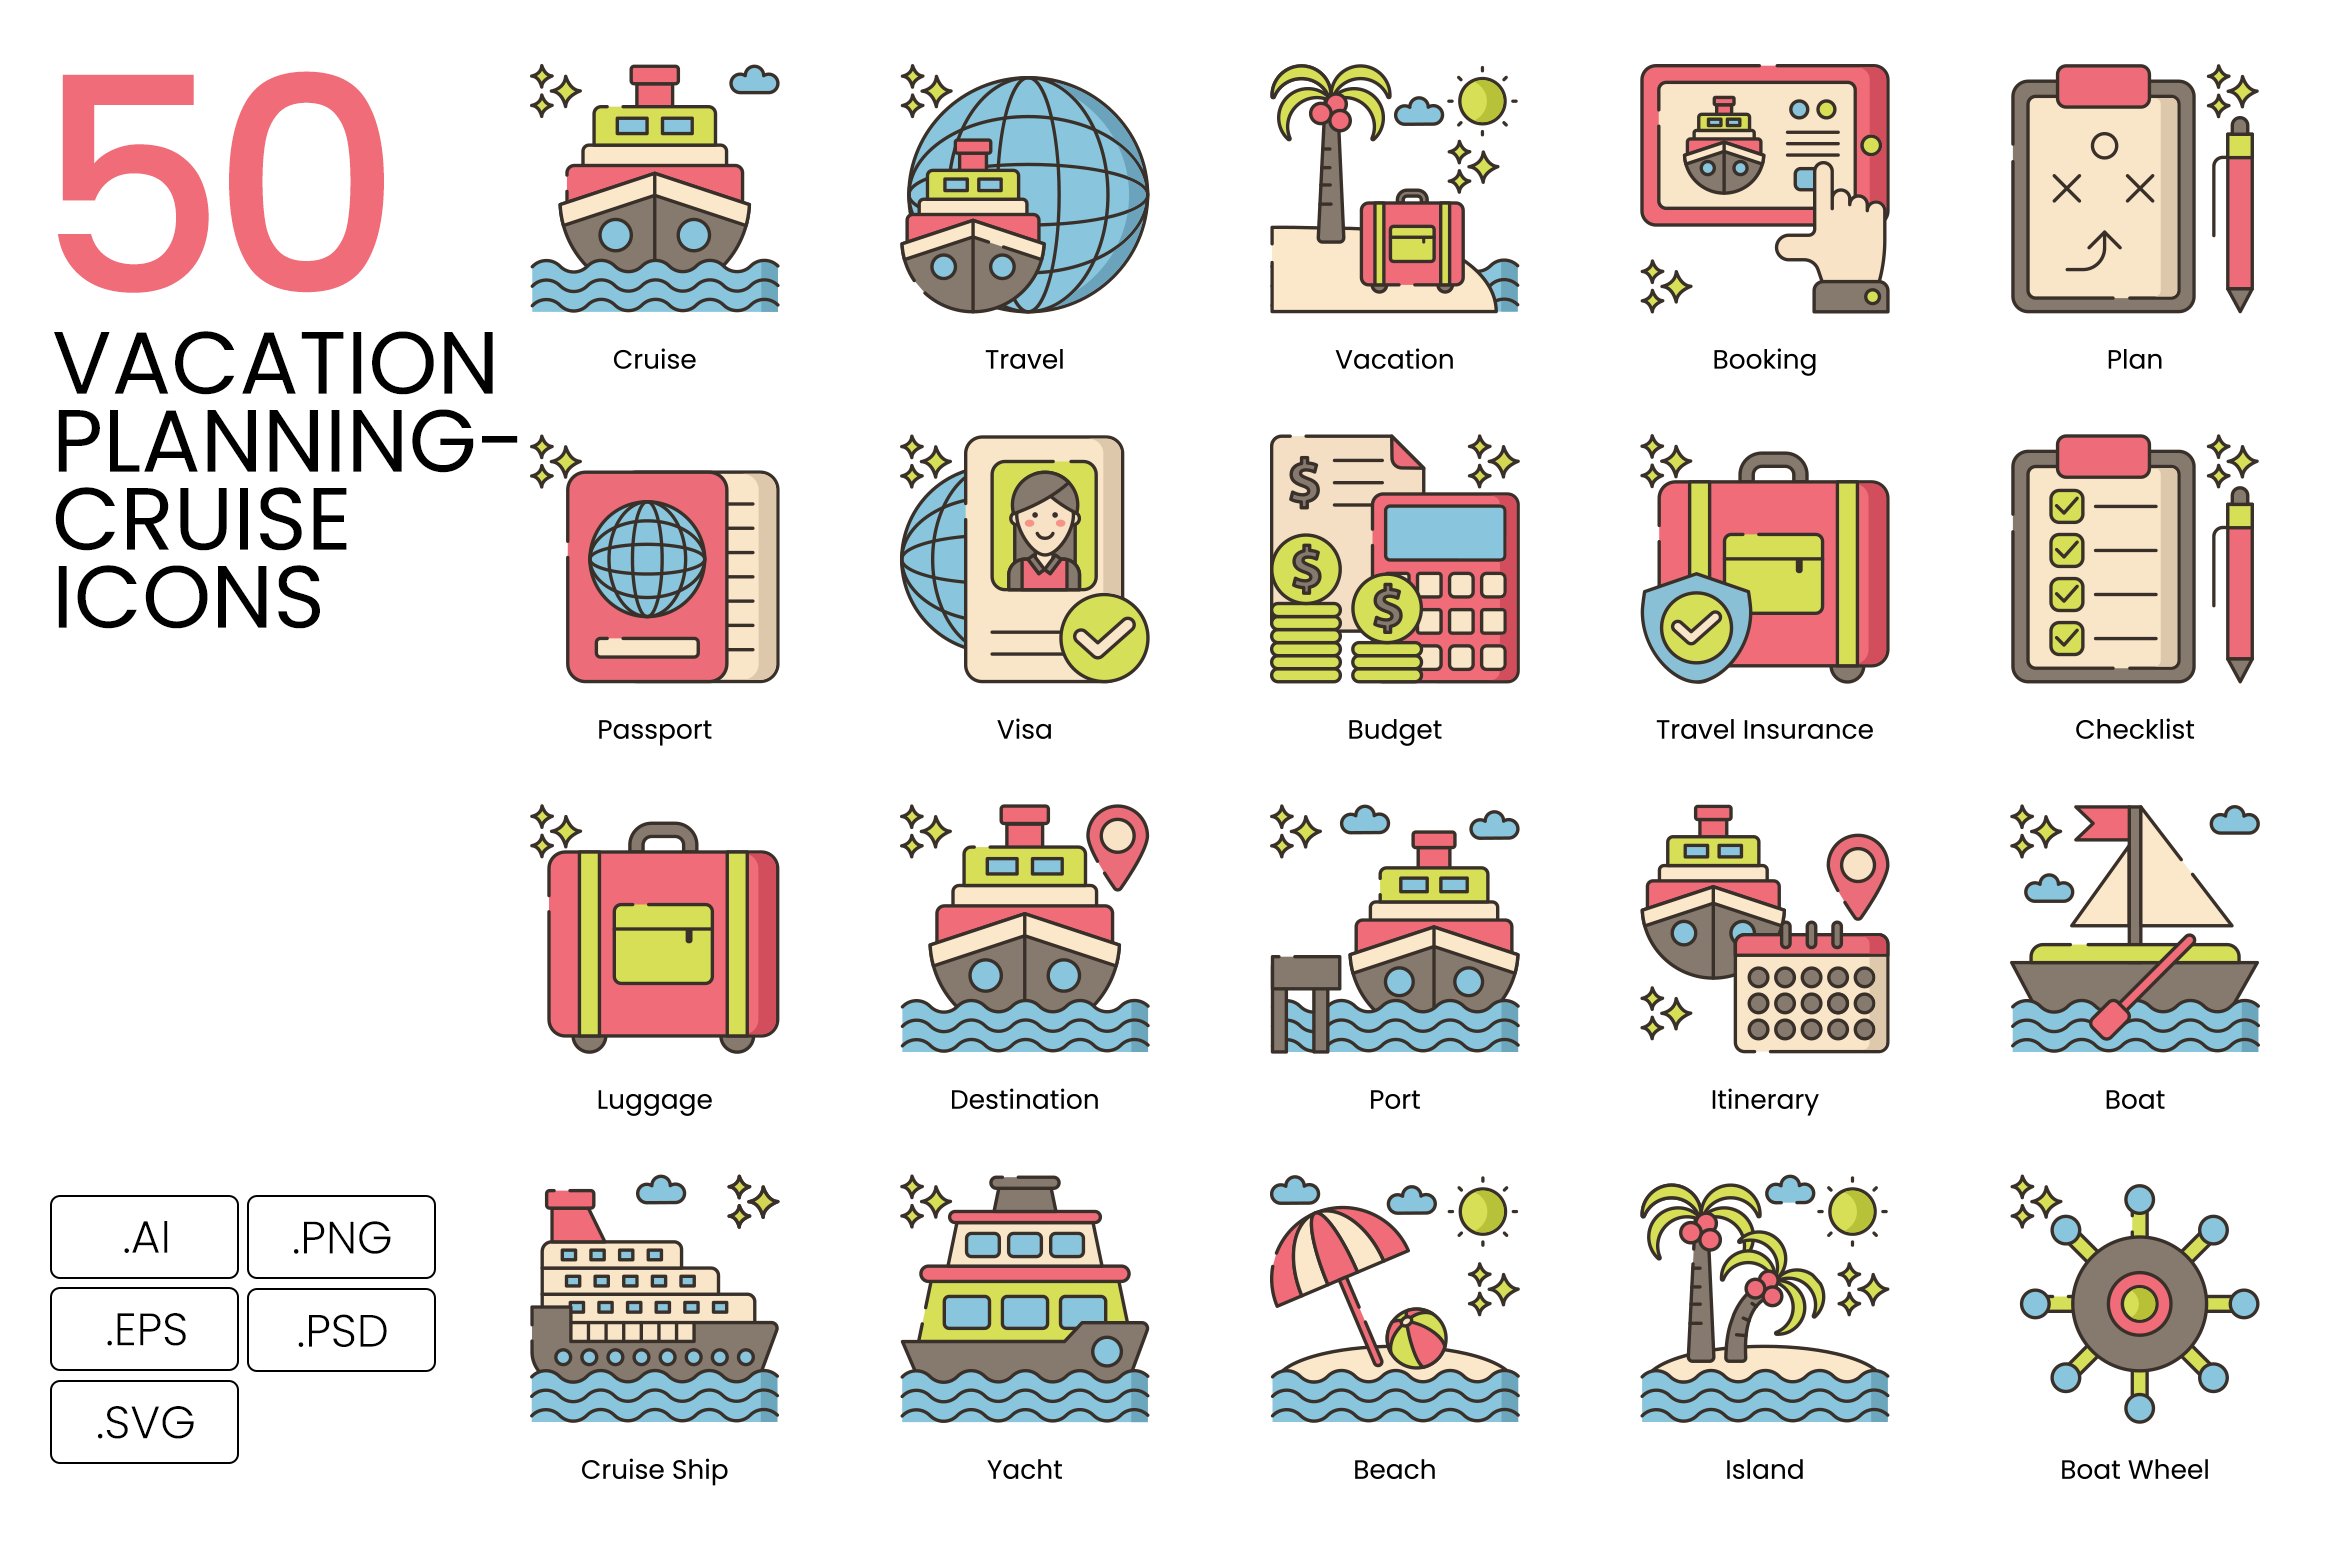 50 Vacation Planning - Cruise Icons cover image.